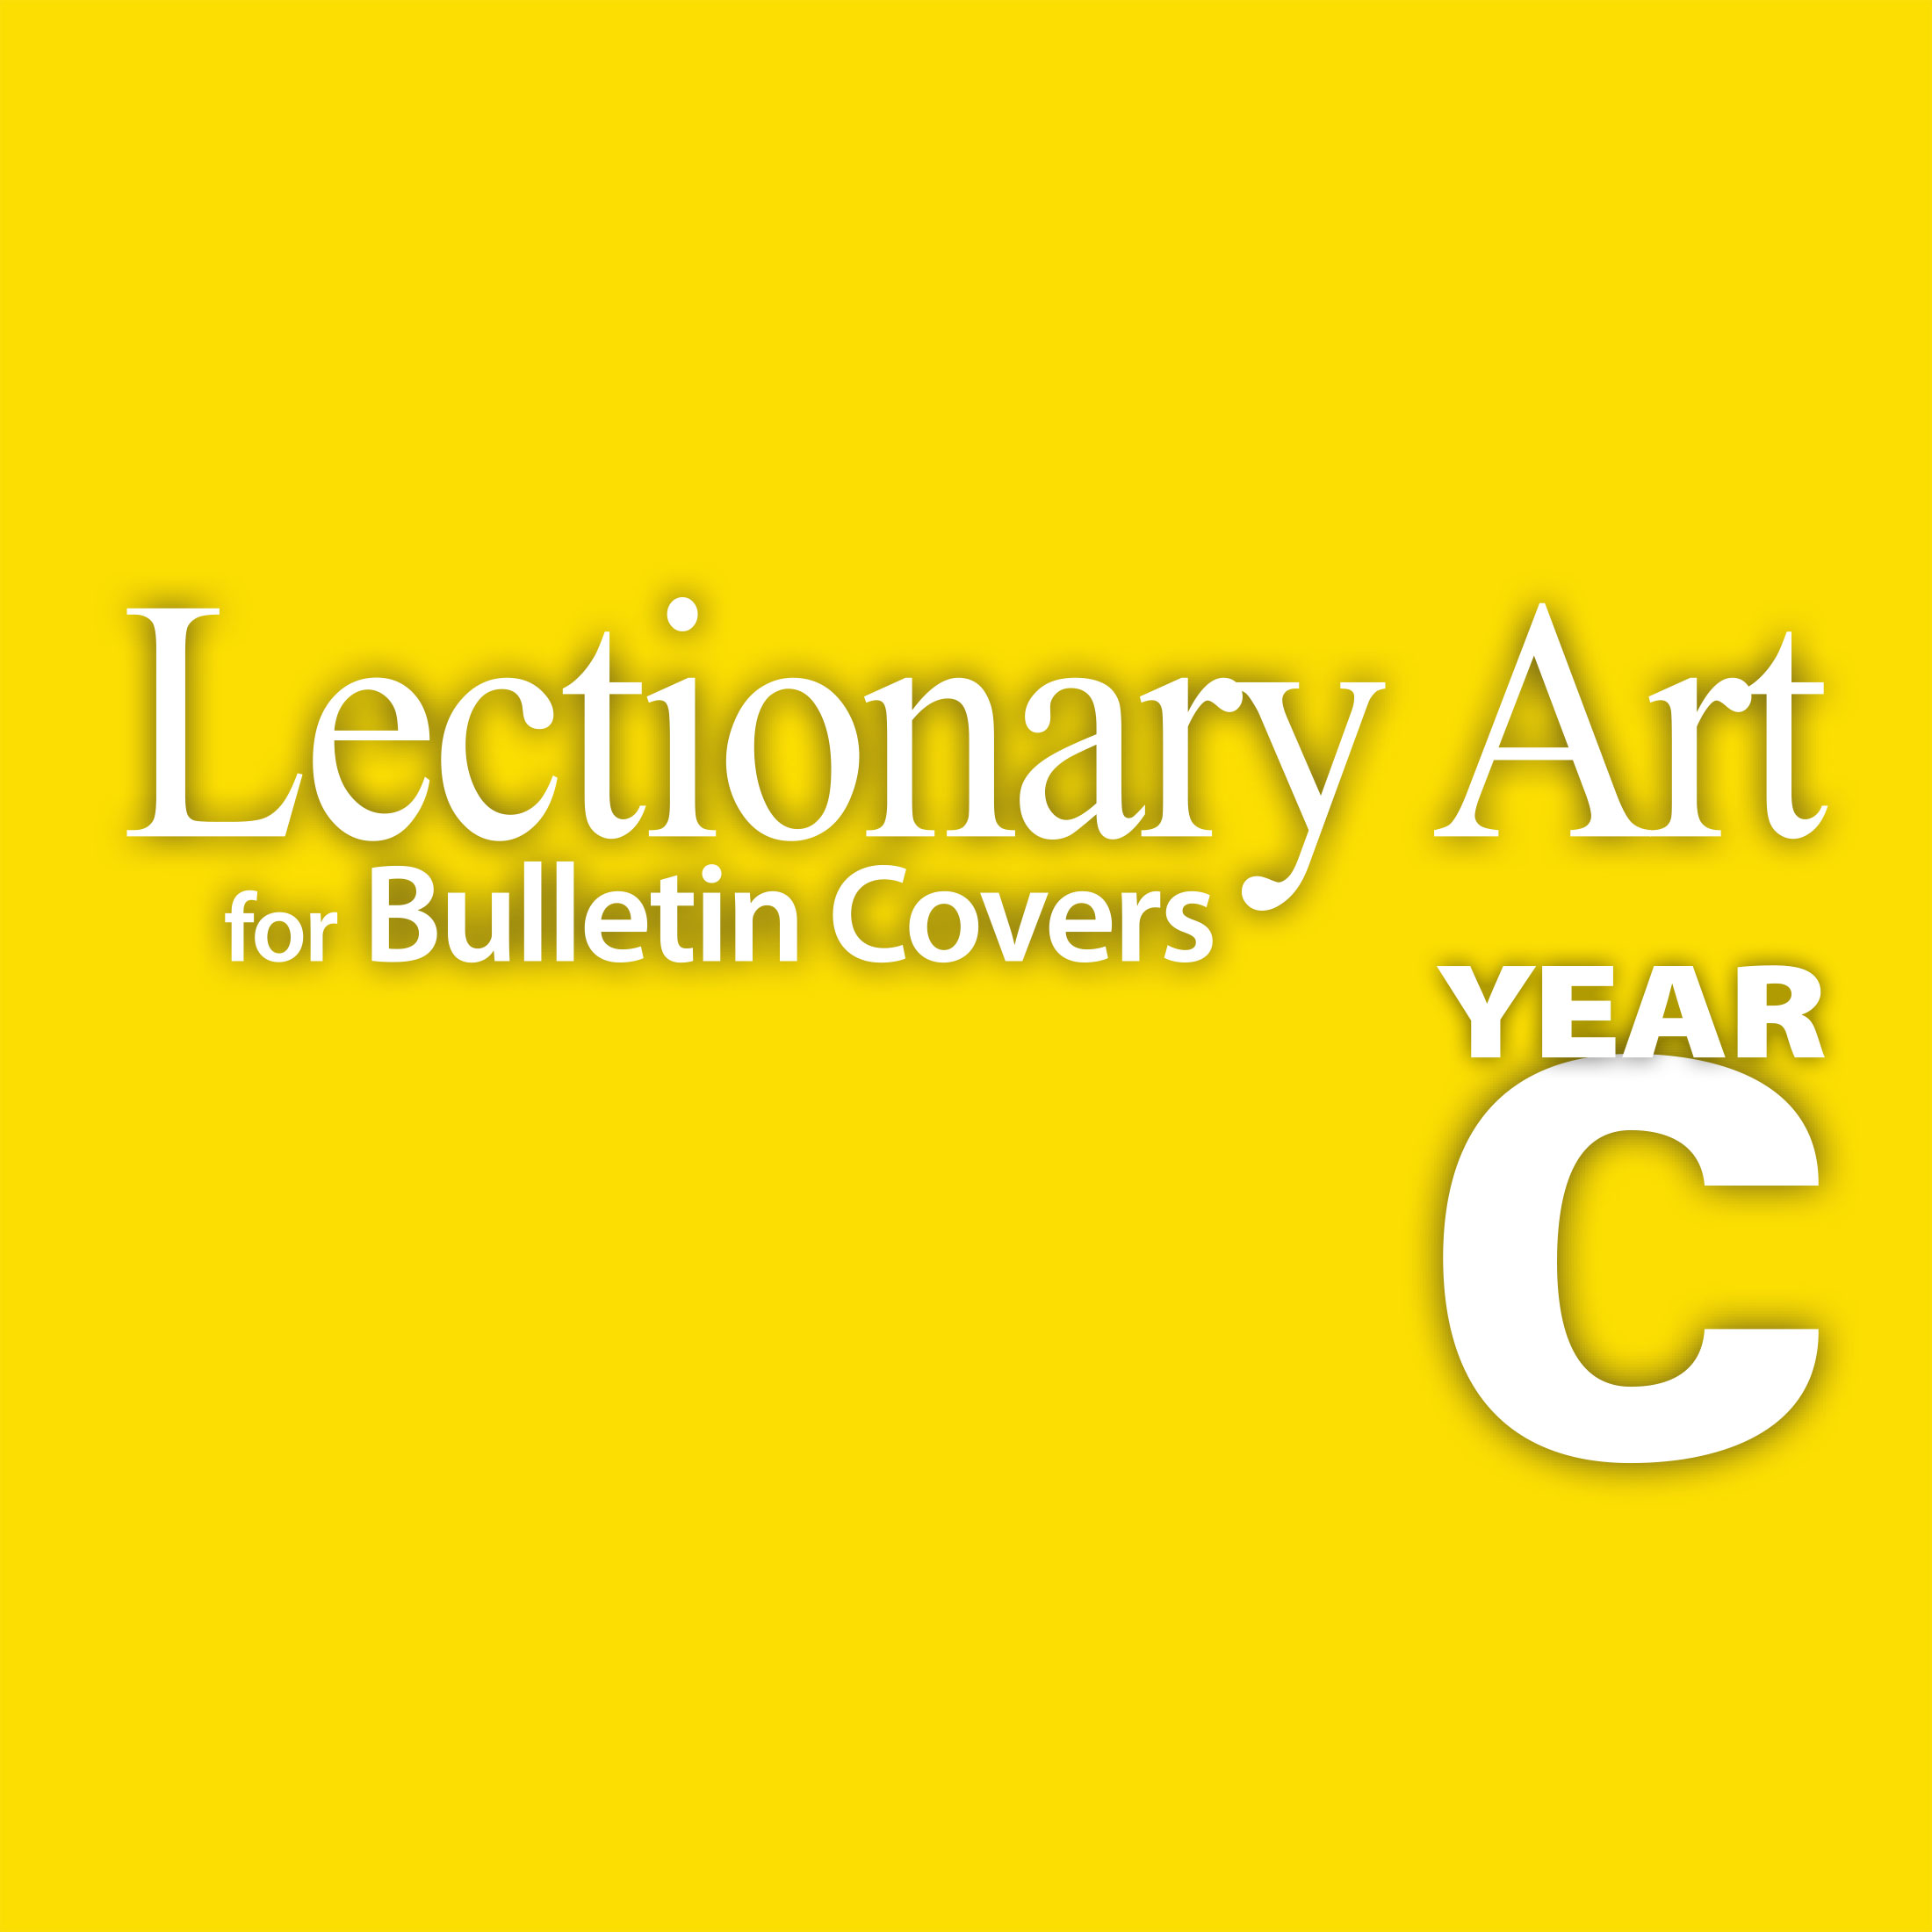 Lectionary Art for Bulletin Covers Year C (20152016)